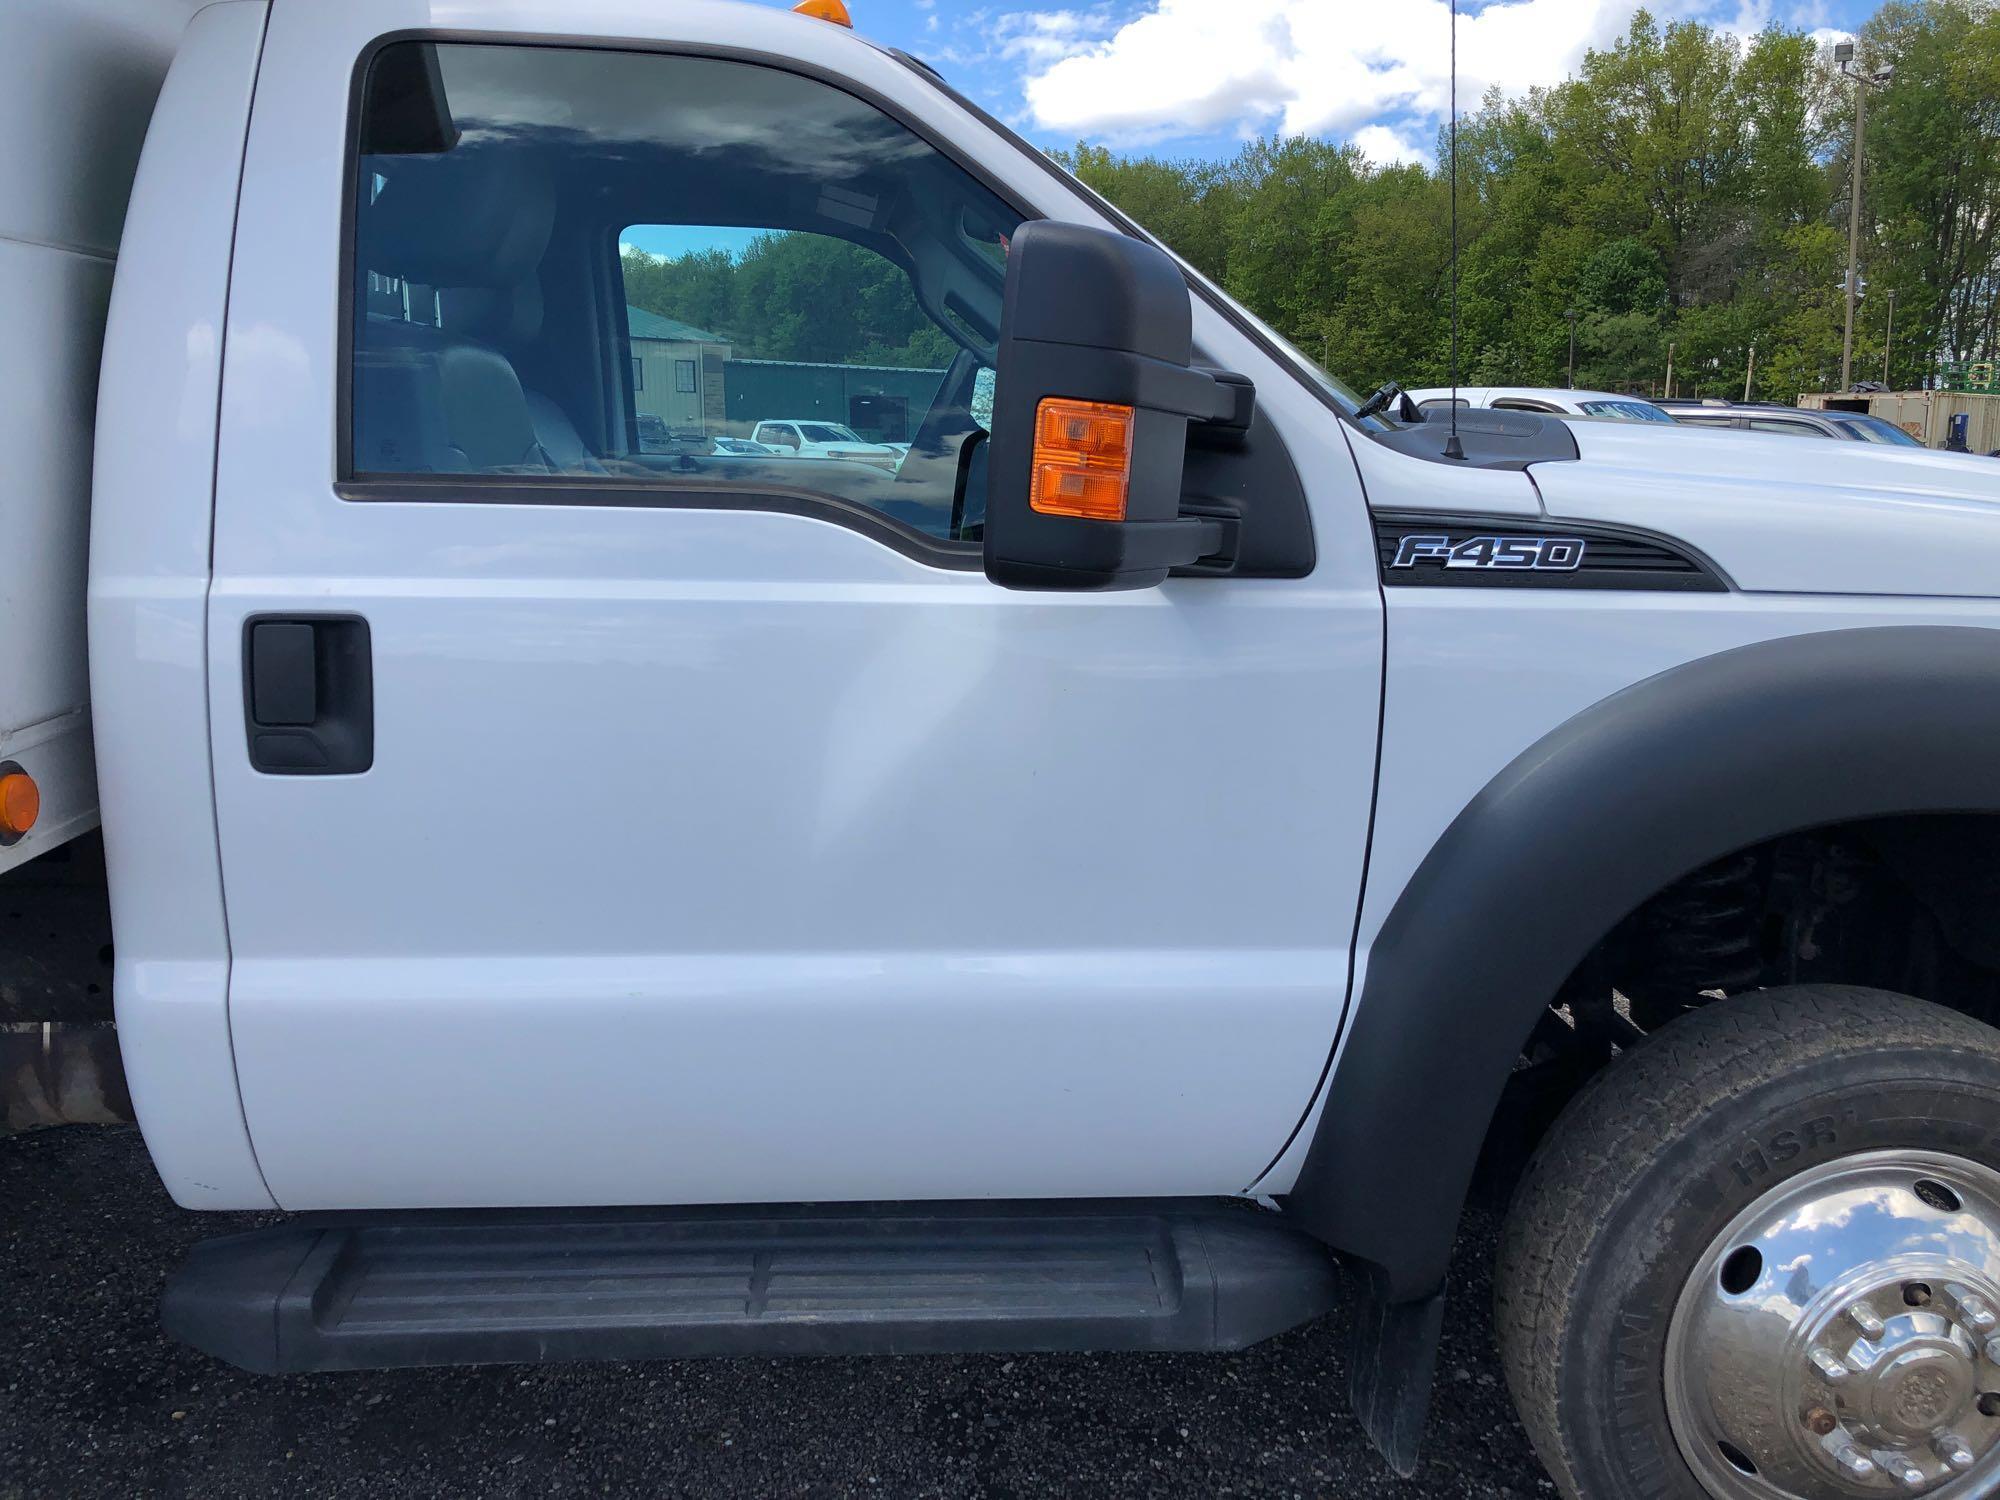 2012 Ford F450 4x2 with 8 ft aluminum dump 54,788 miles. Truck is one owner